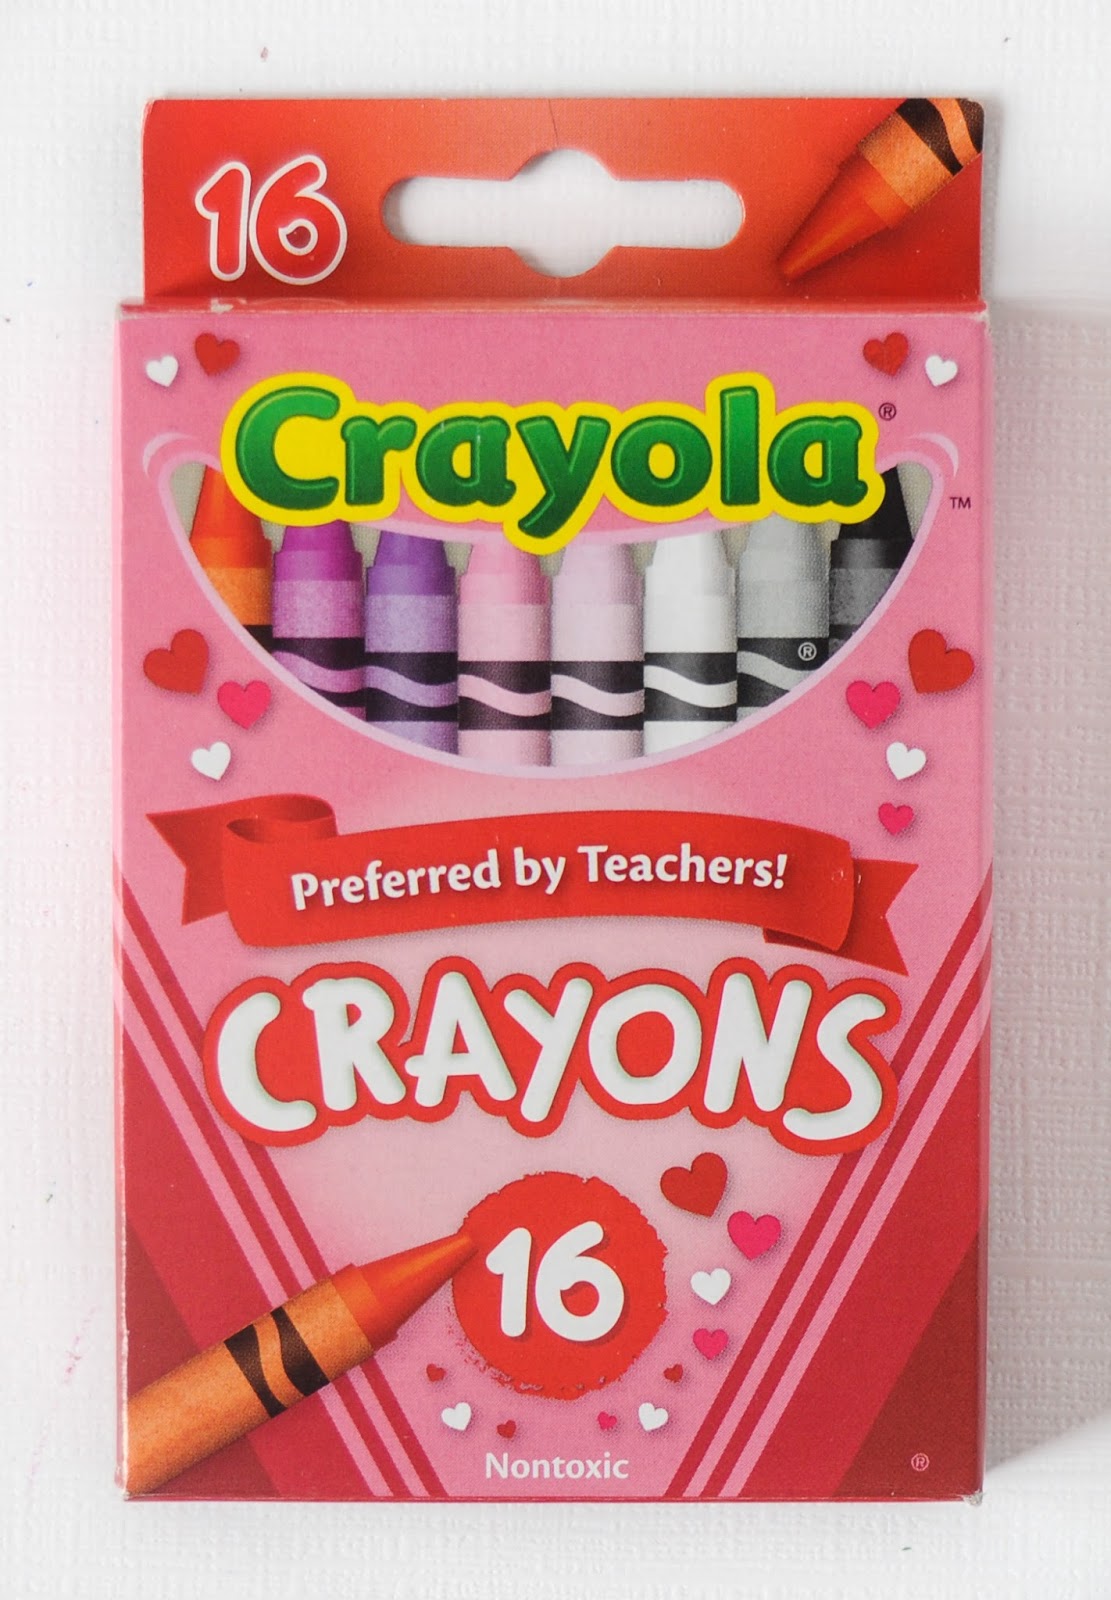 Crayola Valentine's Collection: What's Inside the Box | Jenny's Crayon